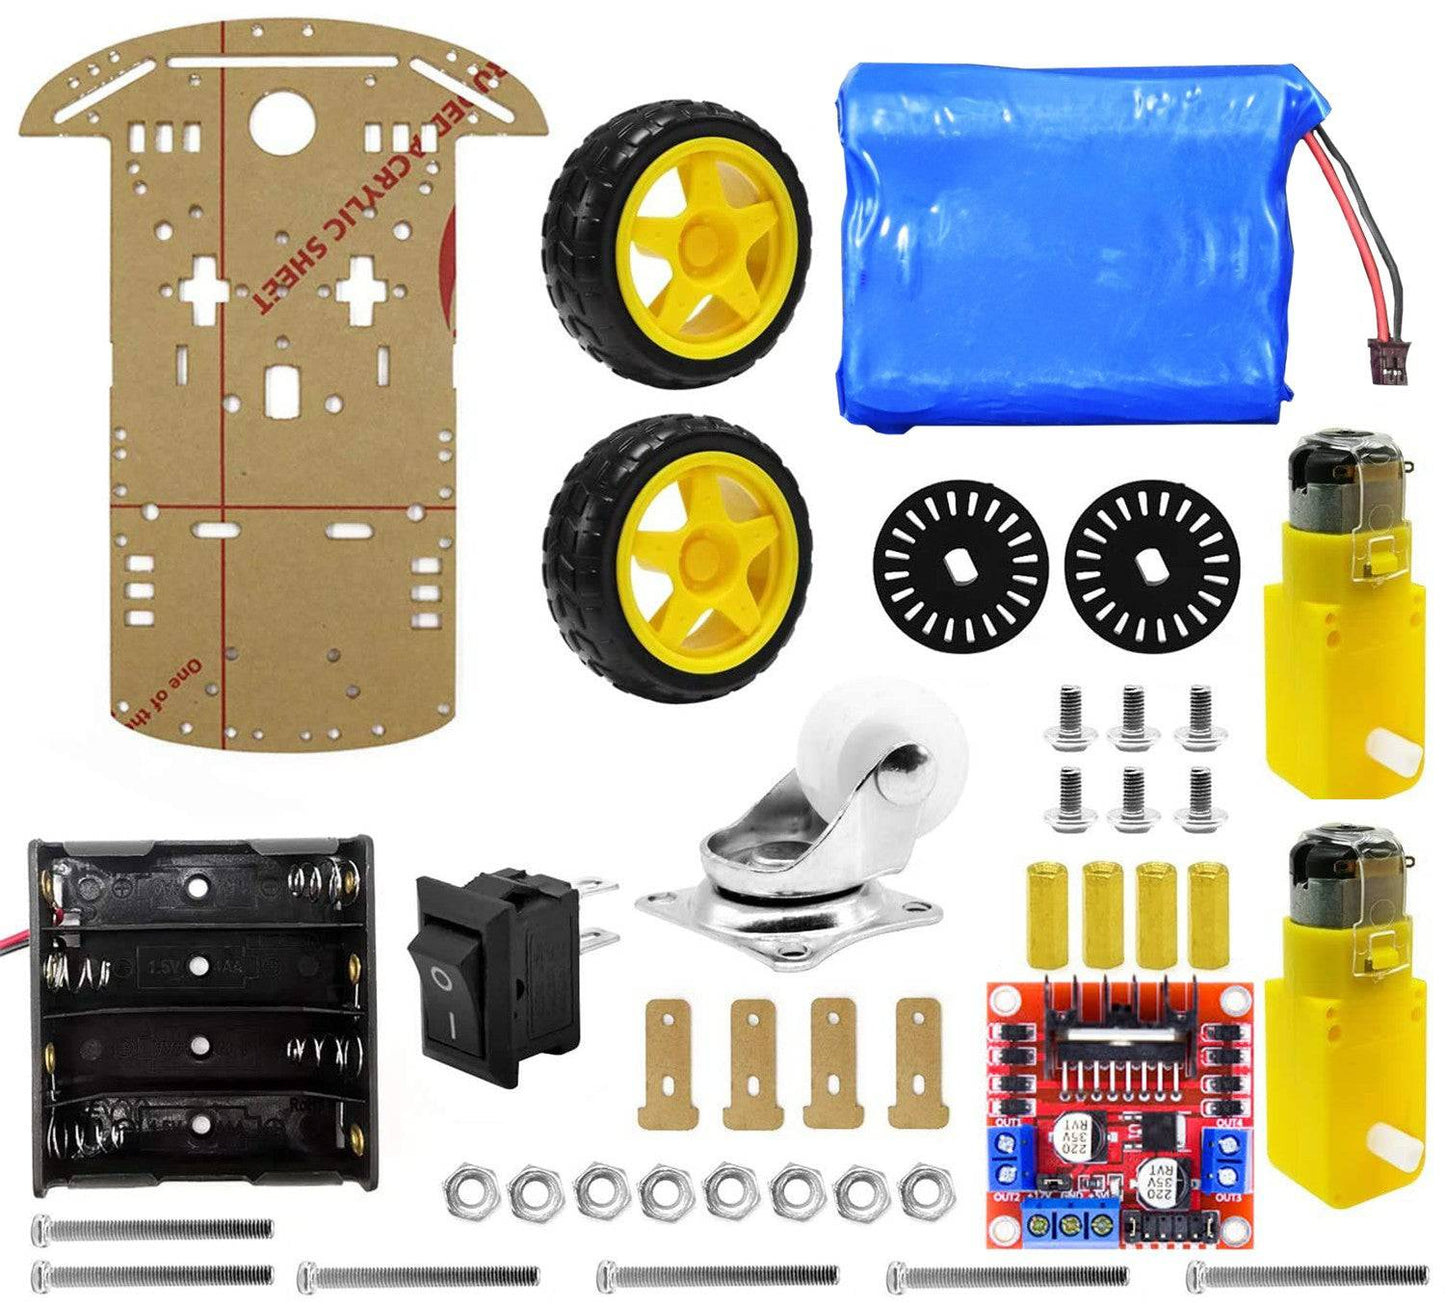 2 Wheel Smart Car Chassis Kit with Battery and L298N Motor Driver Module- RK101-RS342-AA034 - REES52